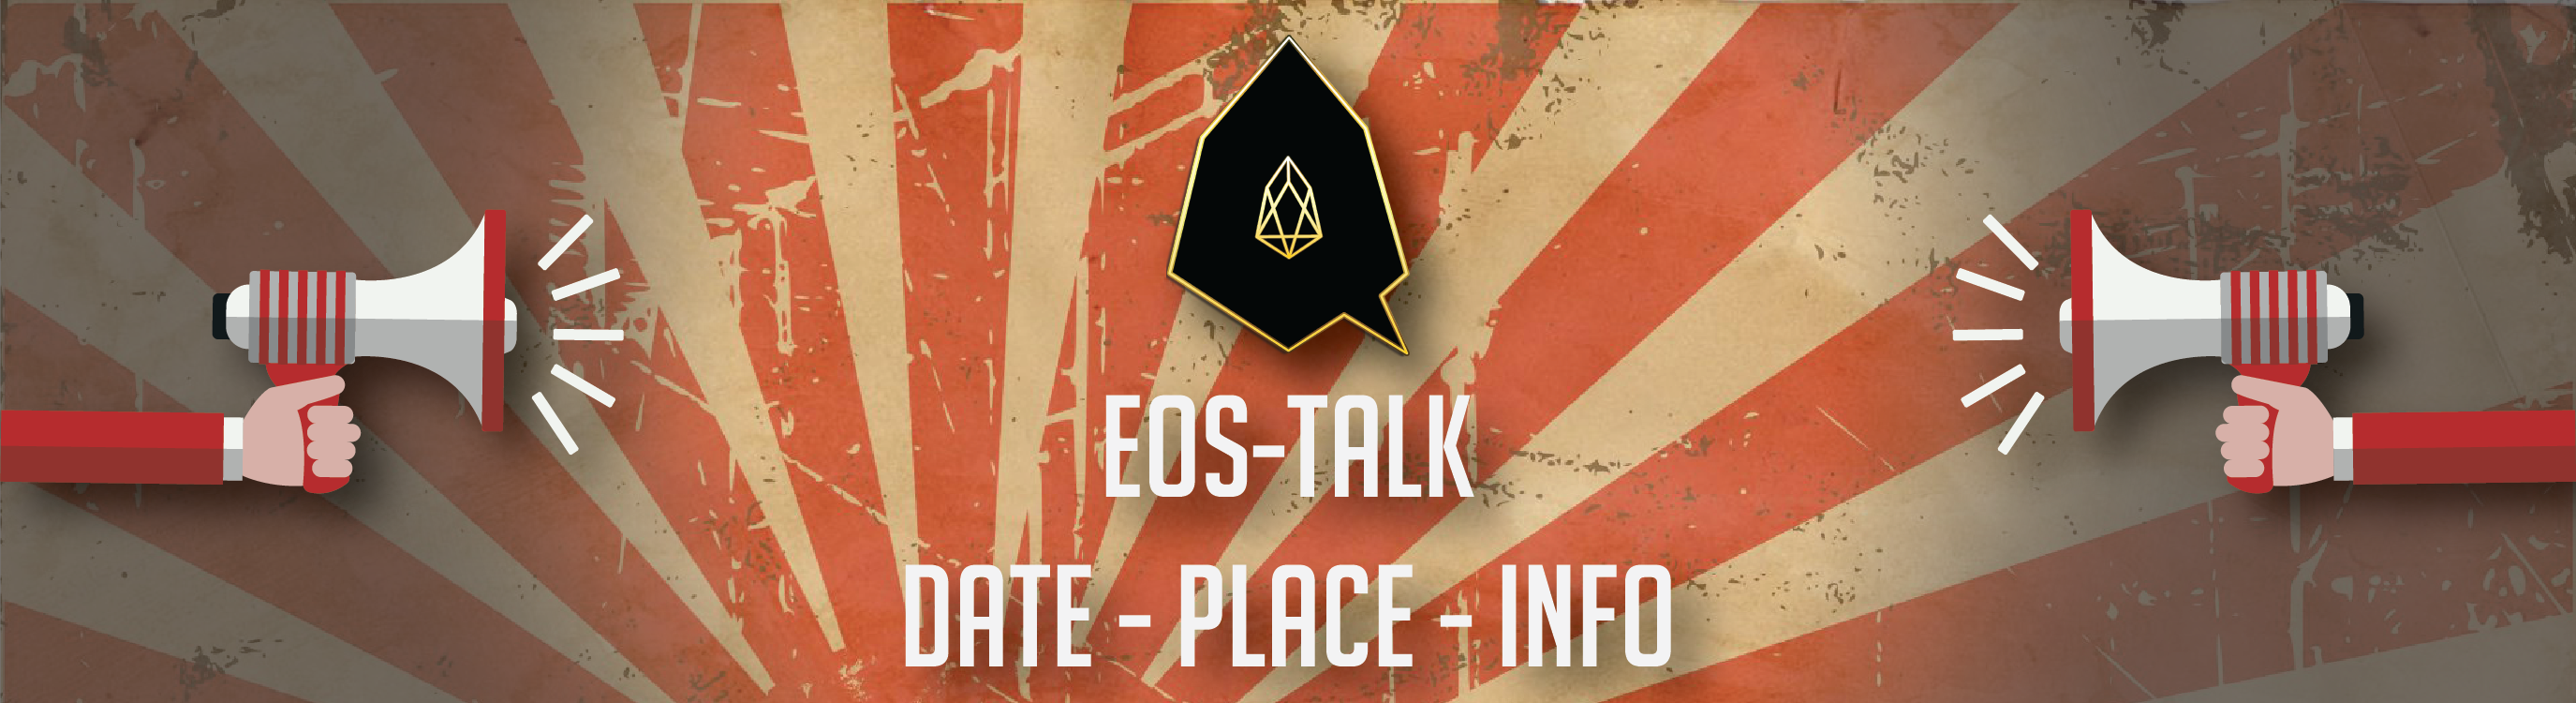 eospngbanner-01.png